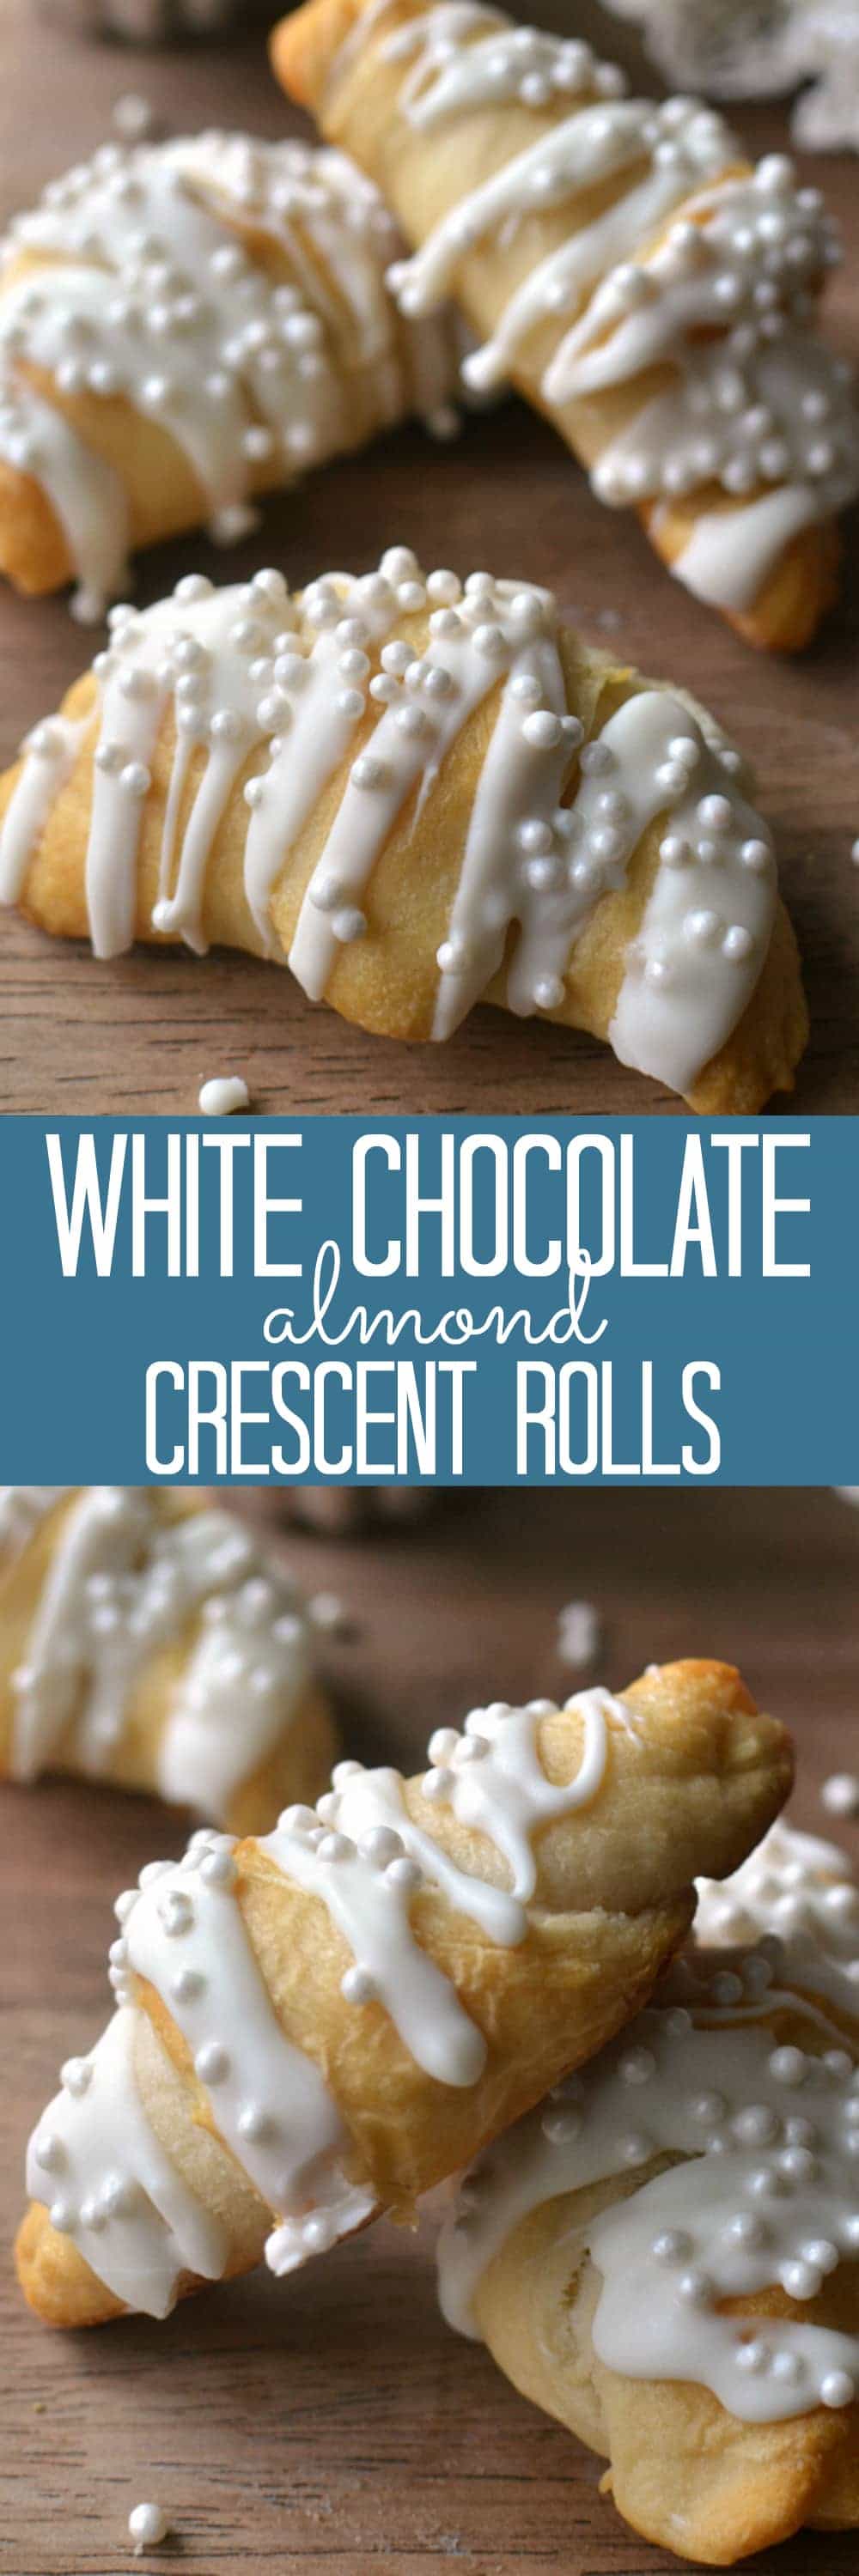 Buttery crescent rolls stuffed with almond cream cheese and sliced almonds and topped with white chocolate and nonpareils. These rolls are not only delicious, they're so pretty, too! Perfect for New Year's morning, a wedding shower, or any special occasion.